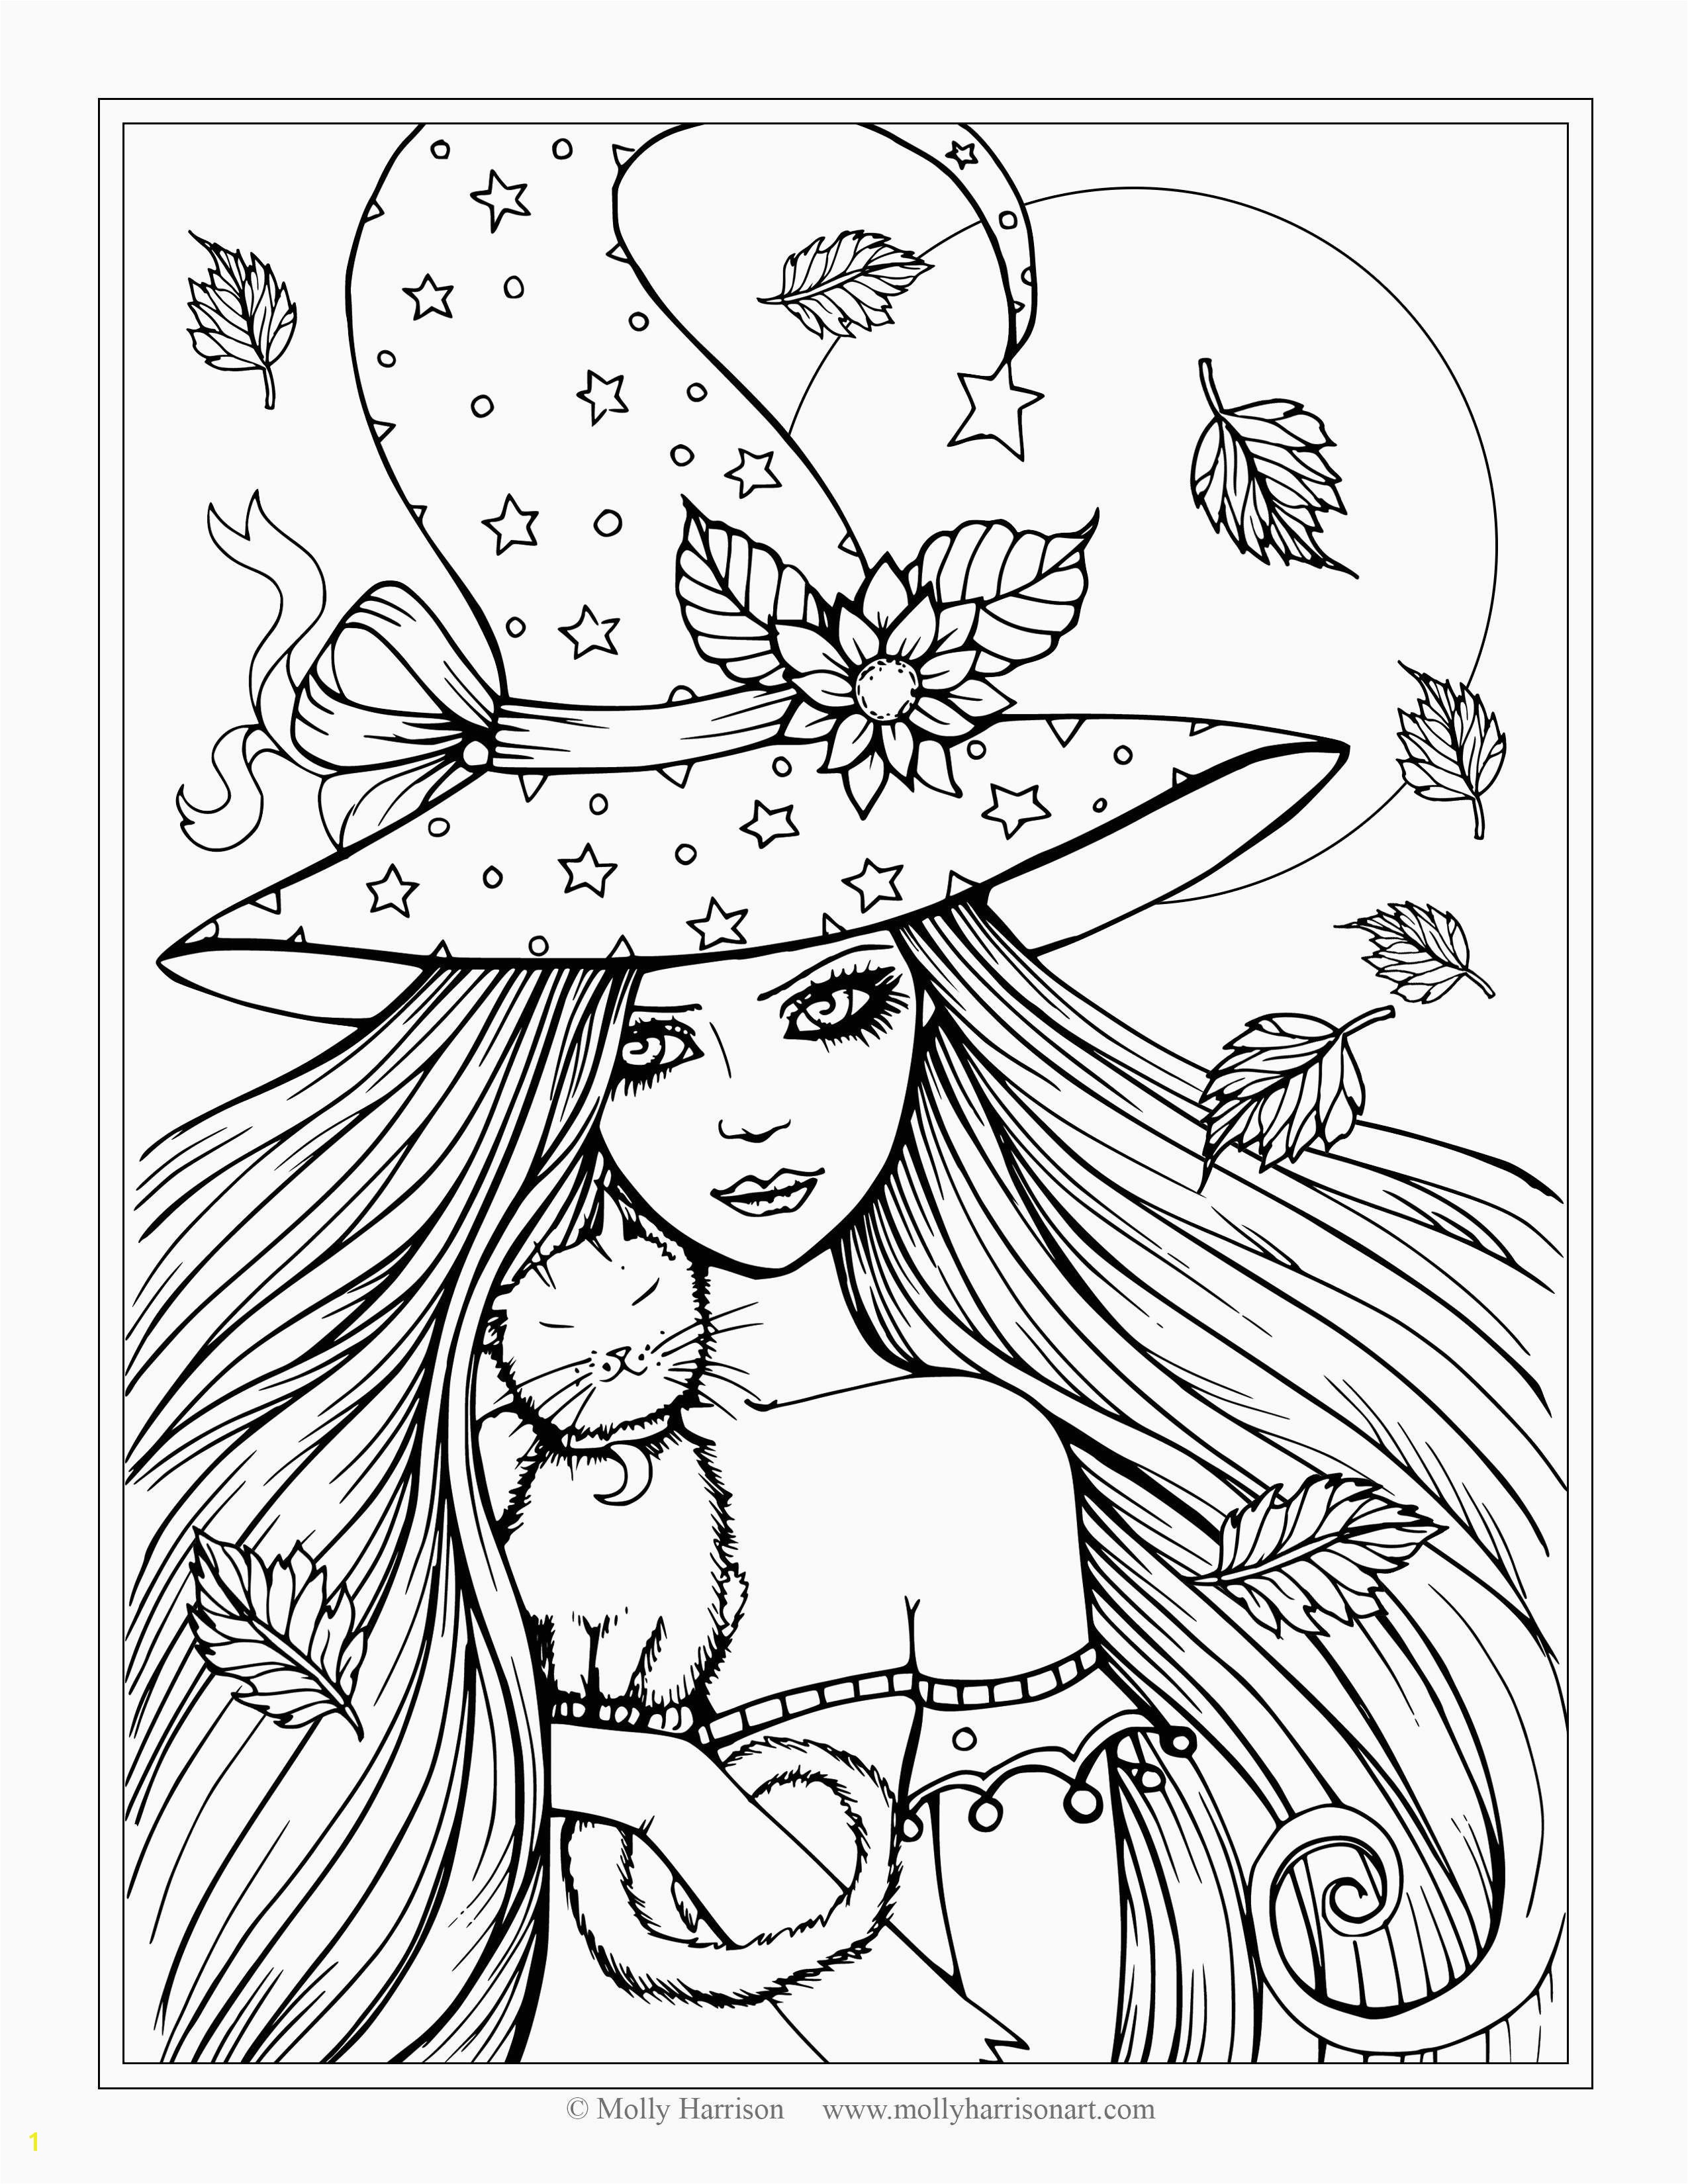 Coloring Page Of A Dress 44 Dress Coloring Pages for Girls Free